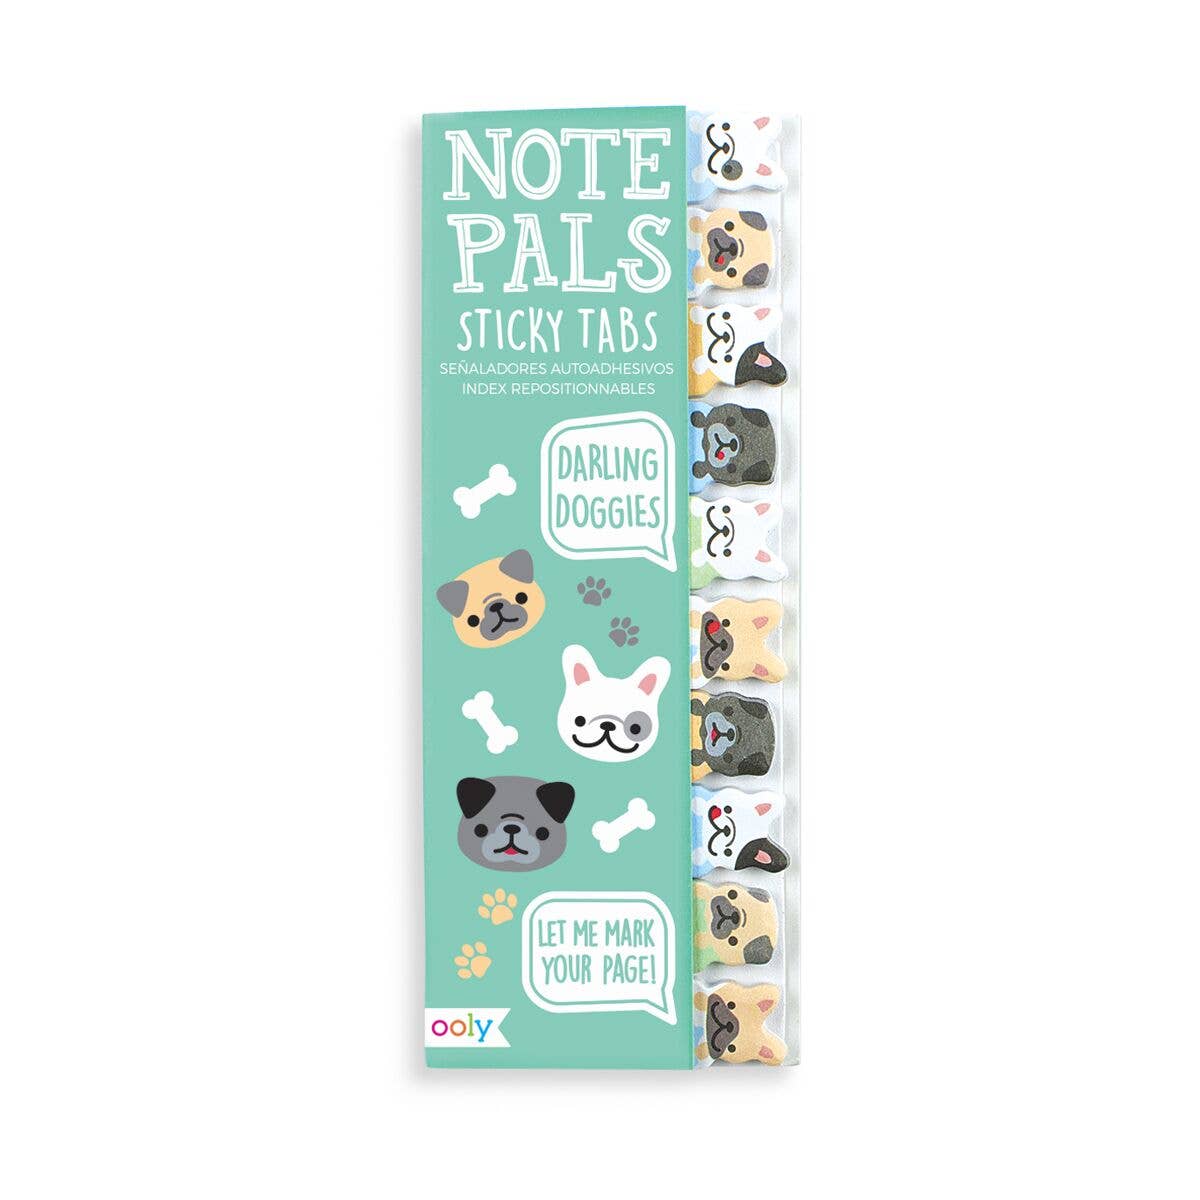 Note Pals Sticky Tabs: Darling Doggies